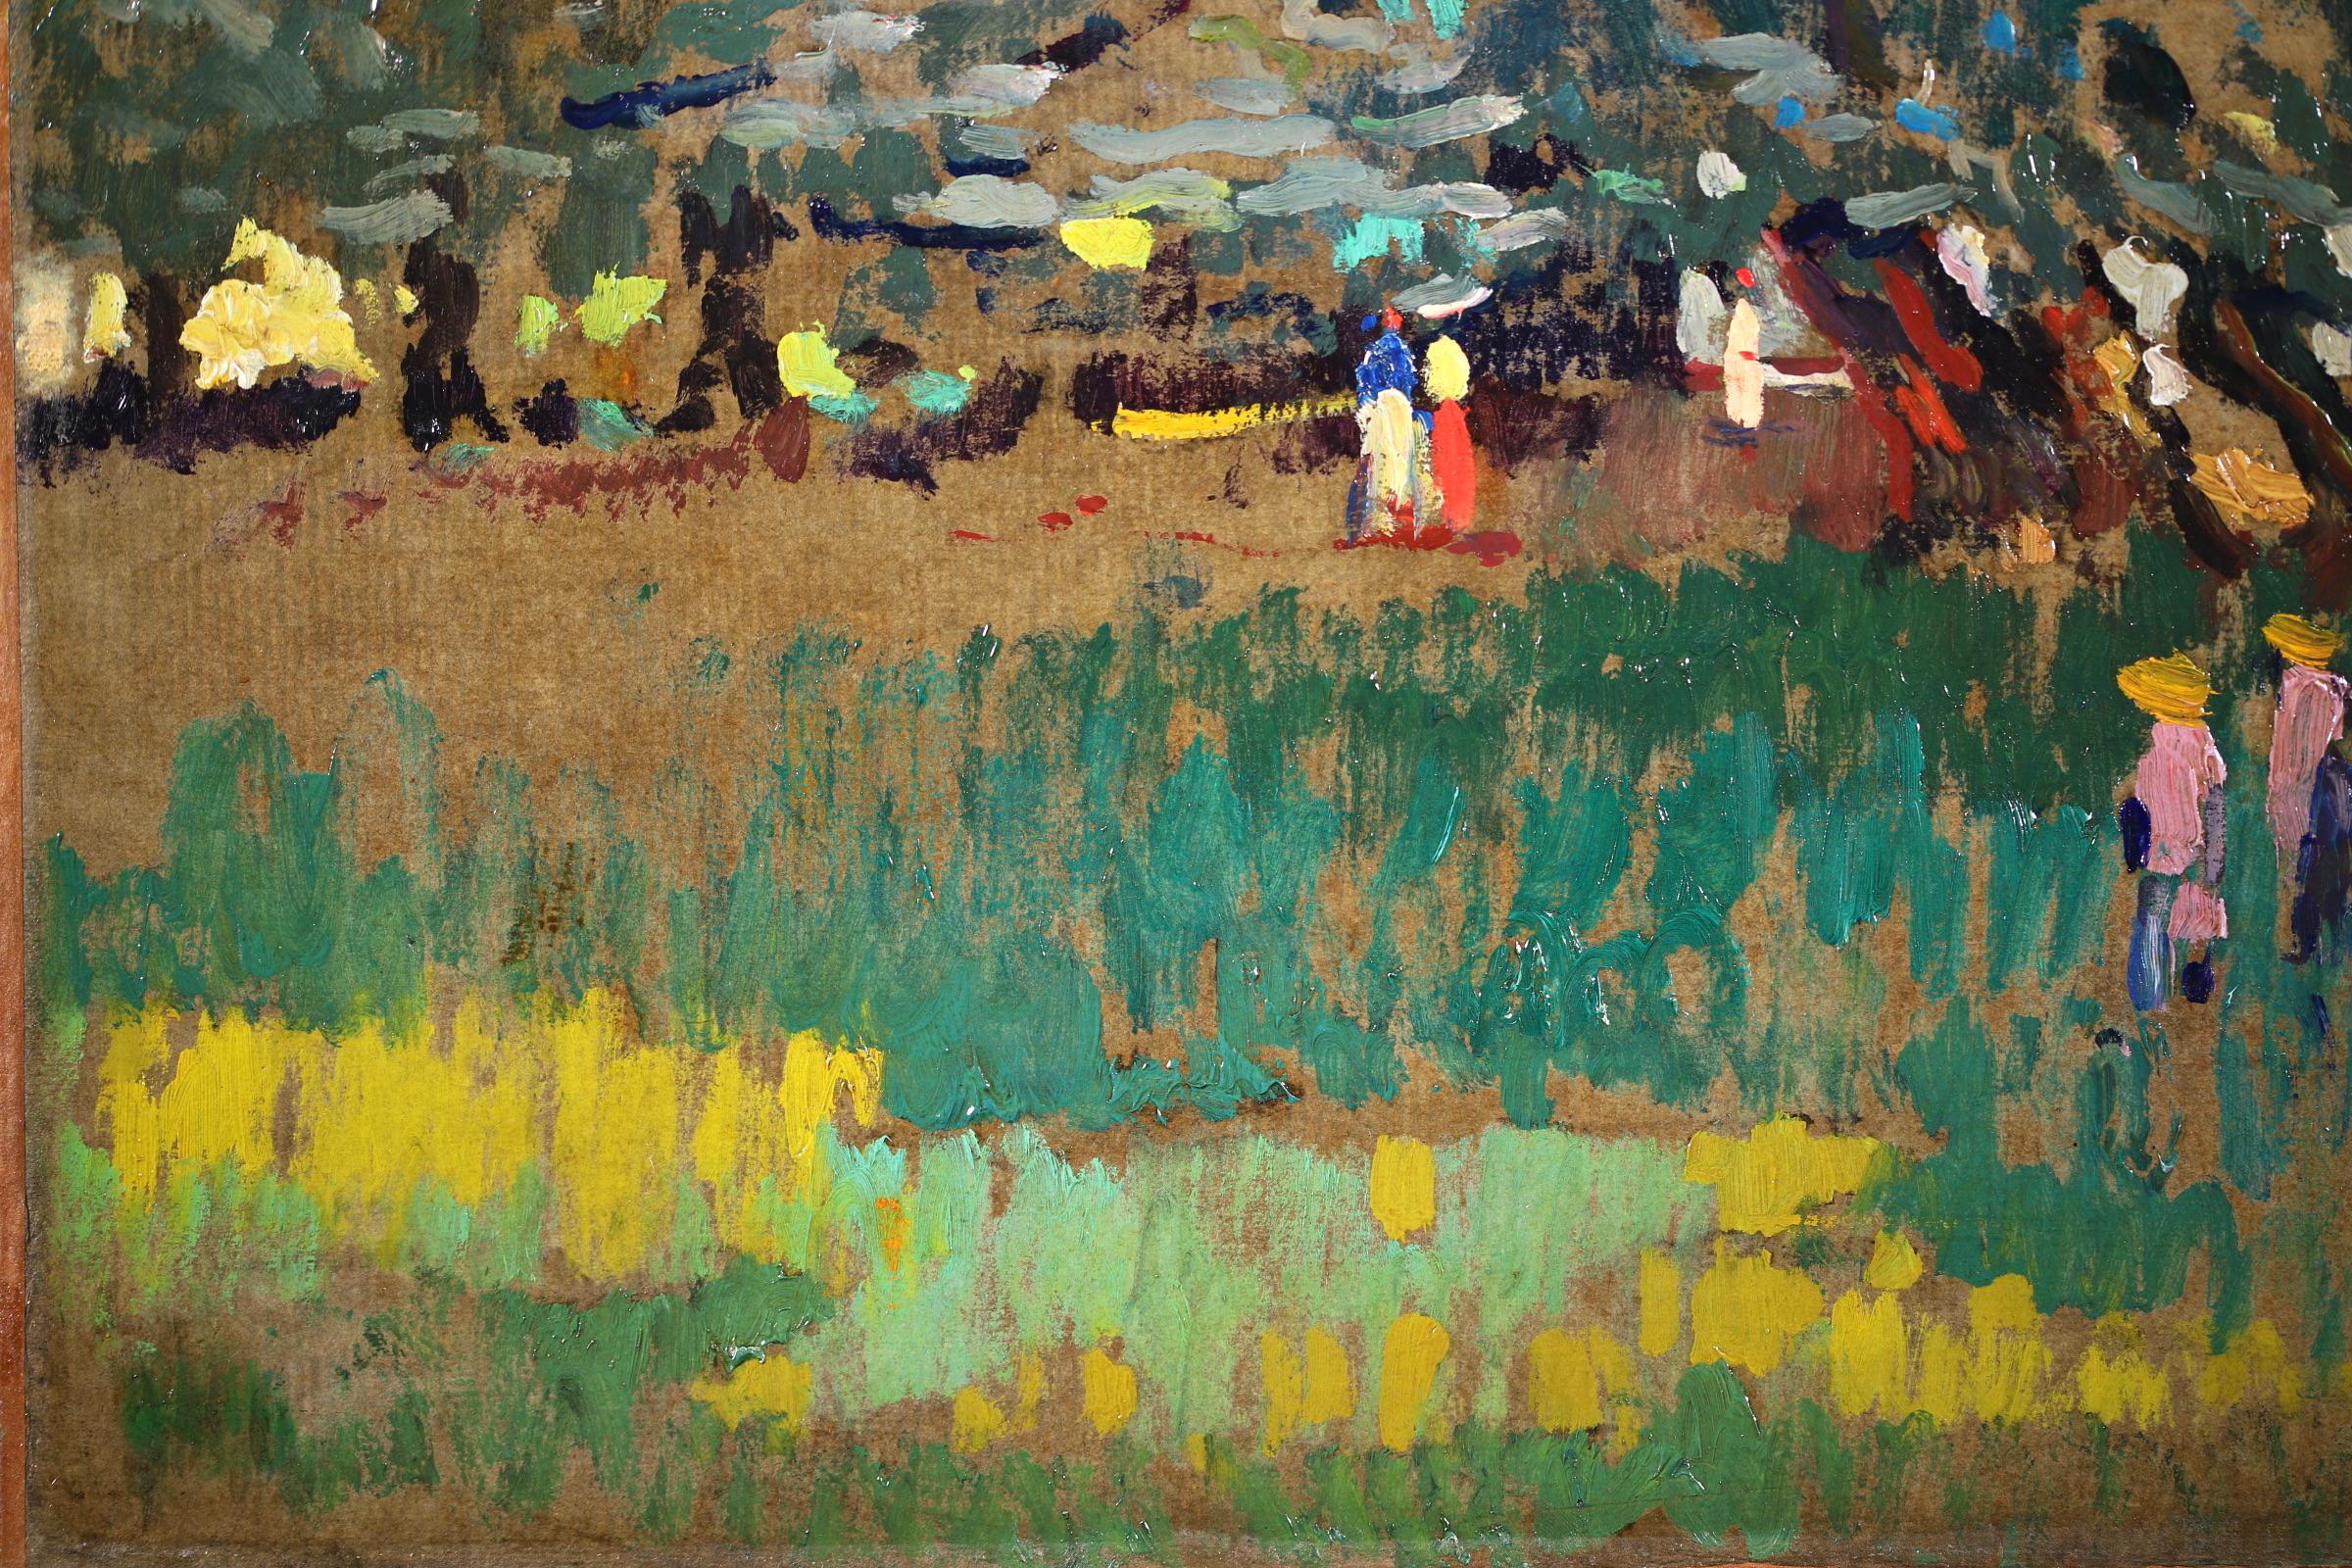 Signed post impressionist landscape oil on board circa 1914 by French painter Paul Elie Gernez. The work depicts figures walking in the shade of trees in a forest. Painted in predominantly greens, blues and yellows, this early example of the